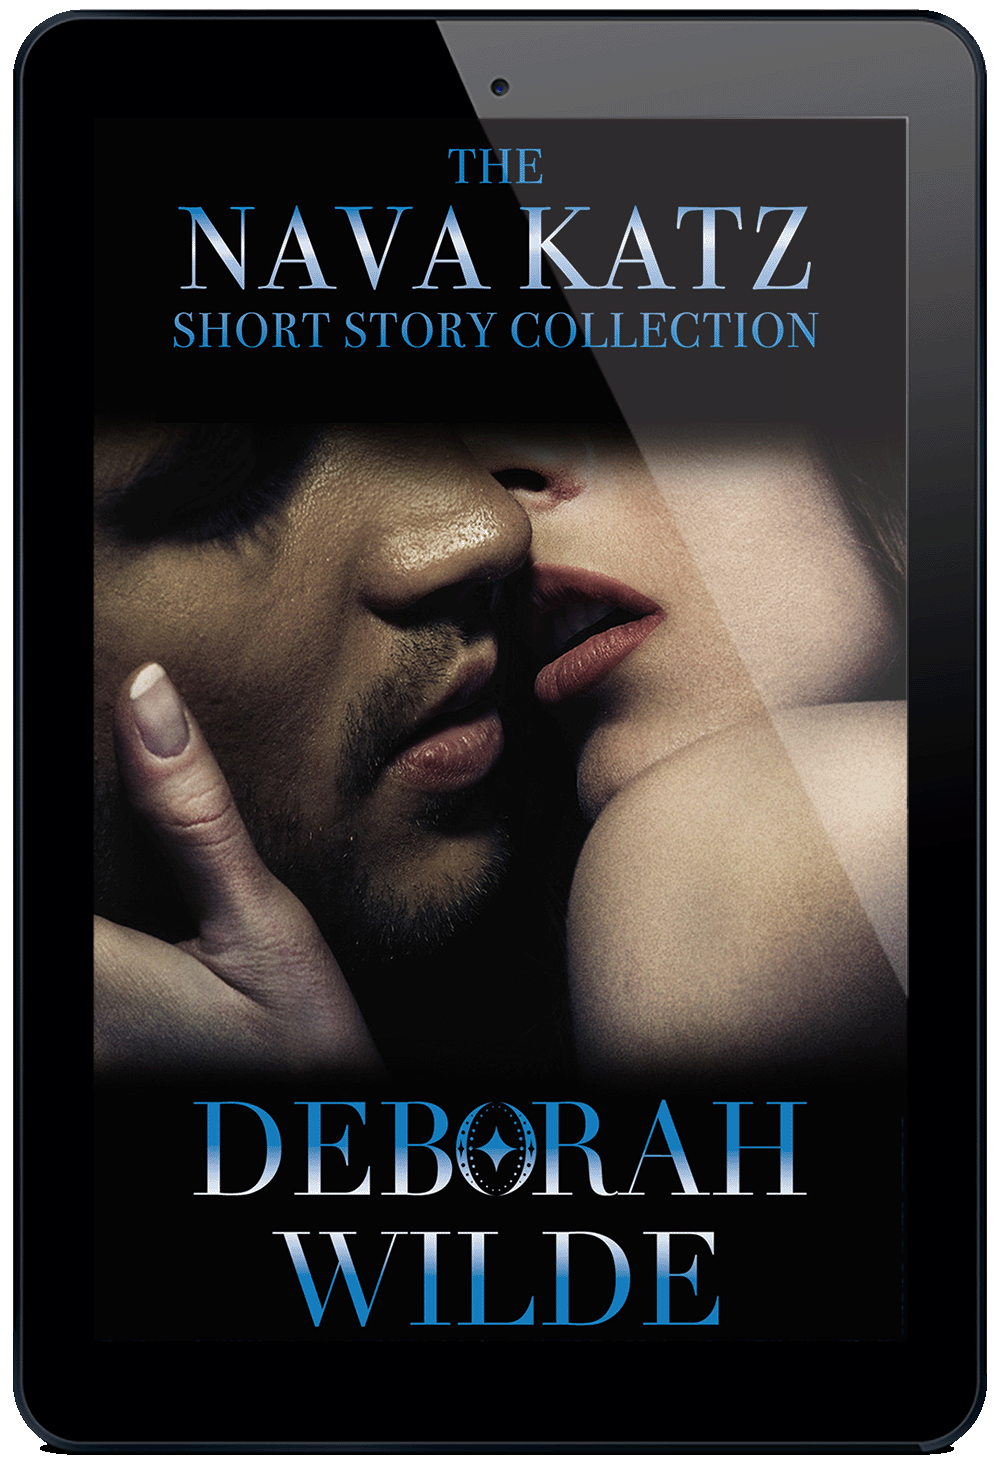 The Nava Katz Short Story Collection. 4 short stories from the boys POV